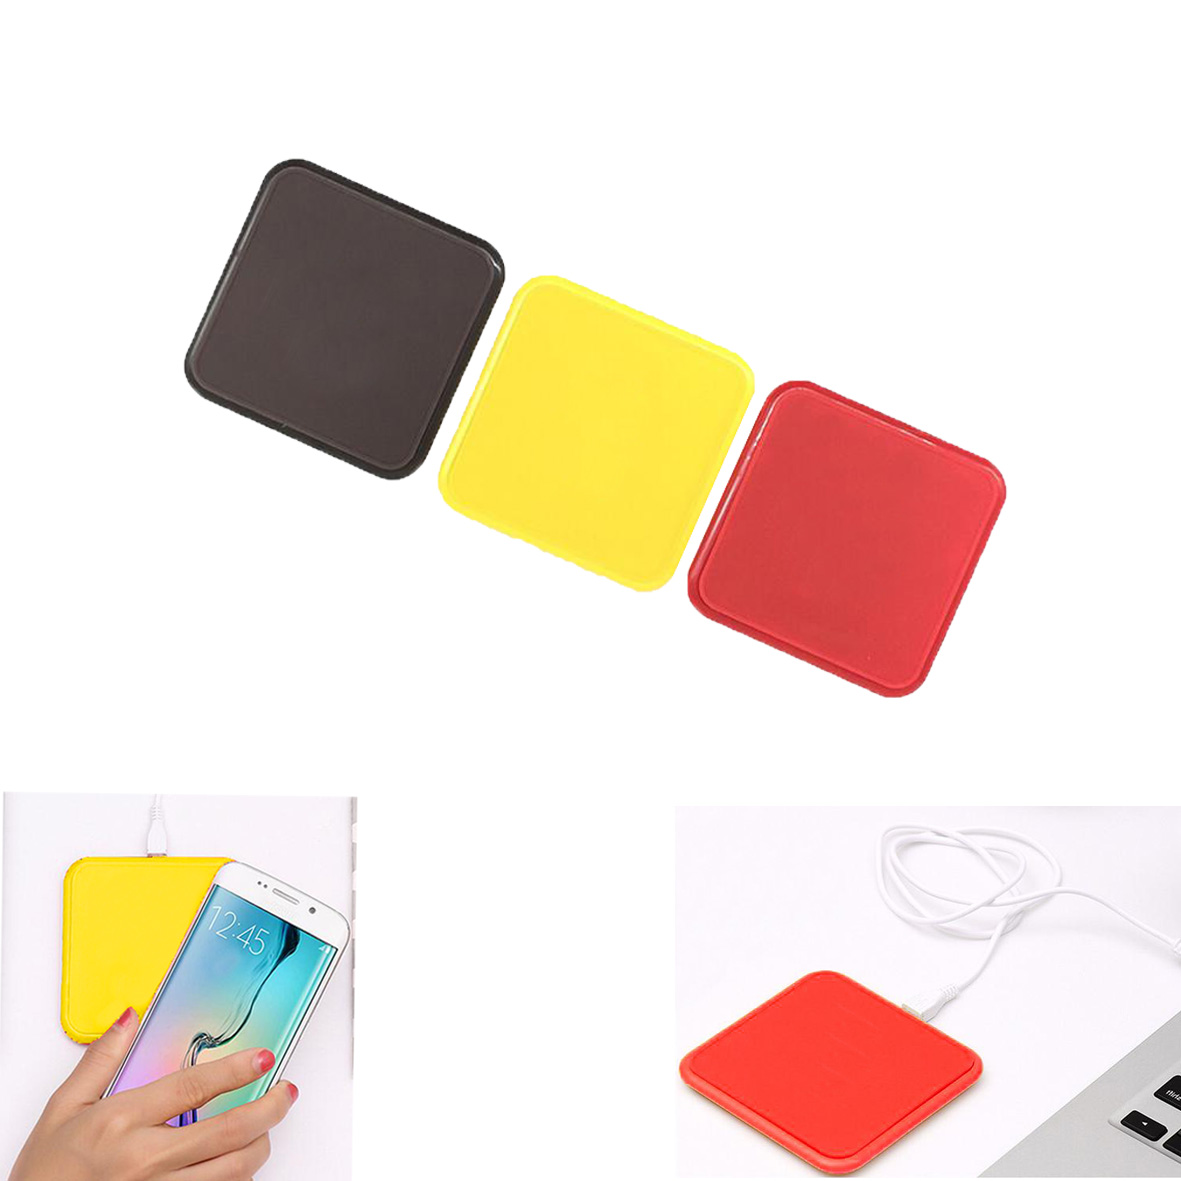 GL-AAA1311 Non-slip Silicone Surface Wireless Charger Pad 5W